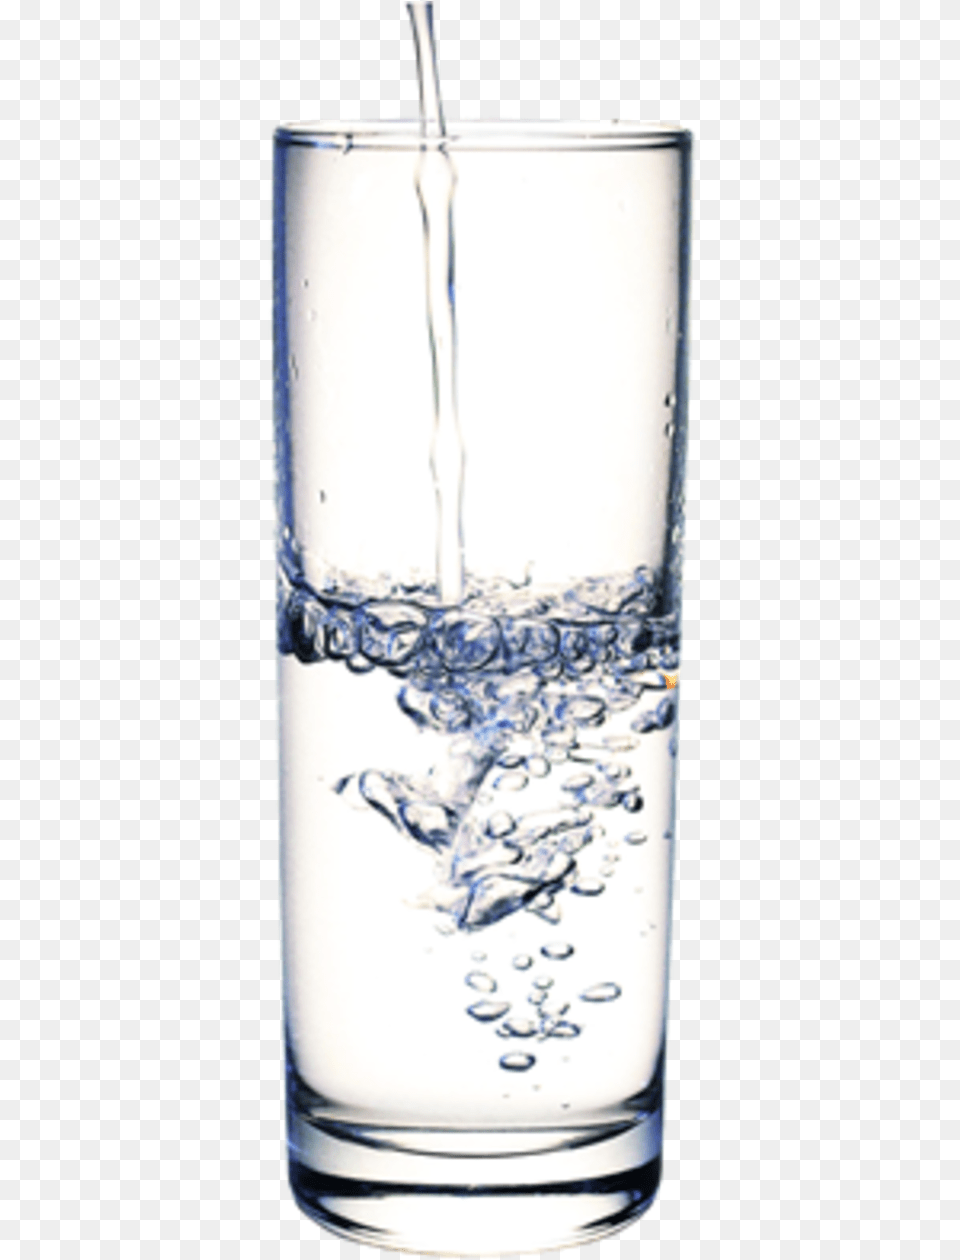 Drinking Water Glass Drinking Water Wastewater 2 Litre Of Water, Ice, Alcohol, Beer, Beverage Png Image